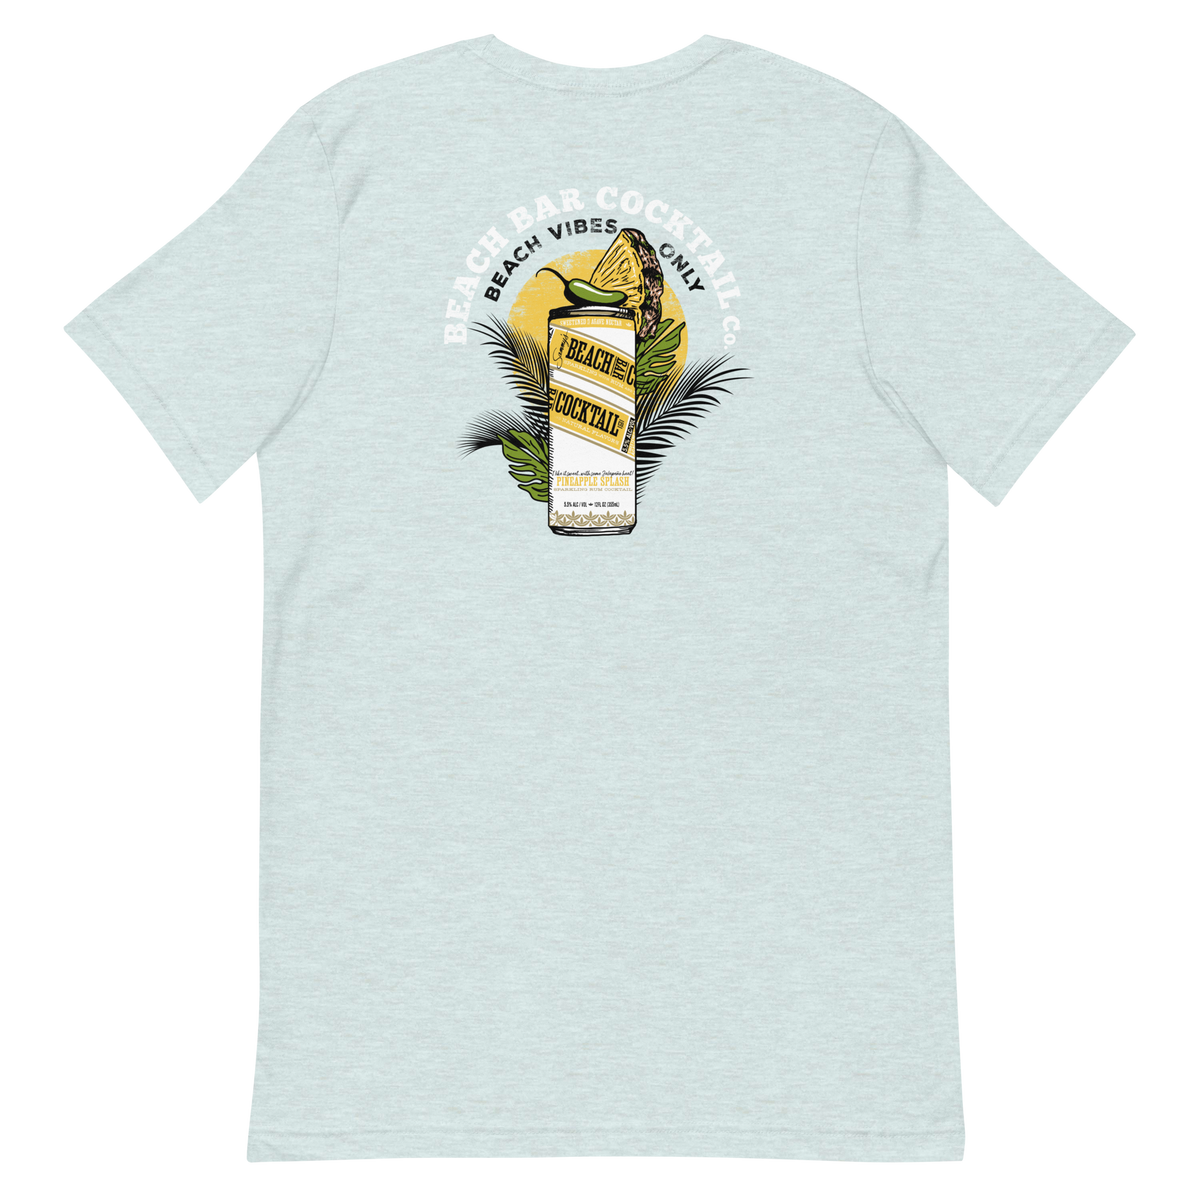 SBBCO &quot;Catching Cocktails&quot; Tee